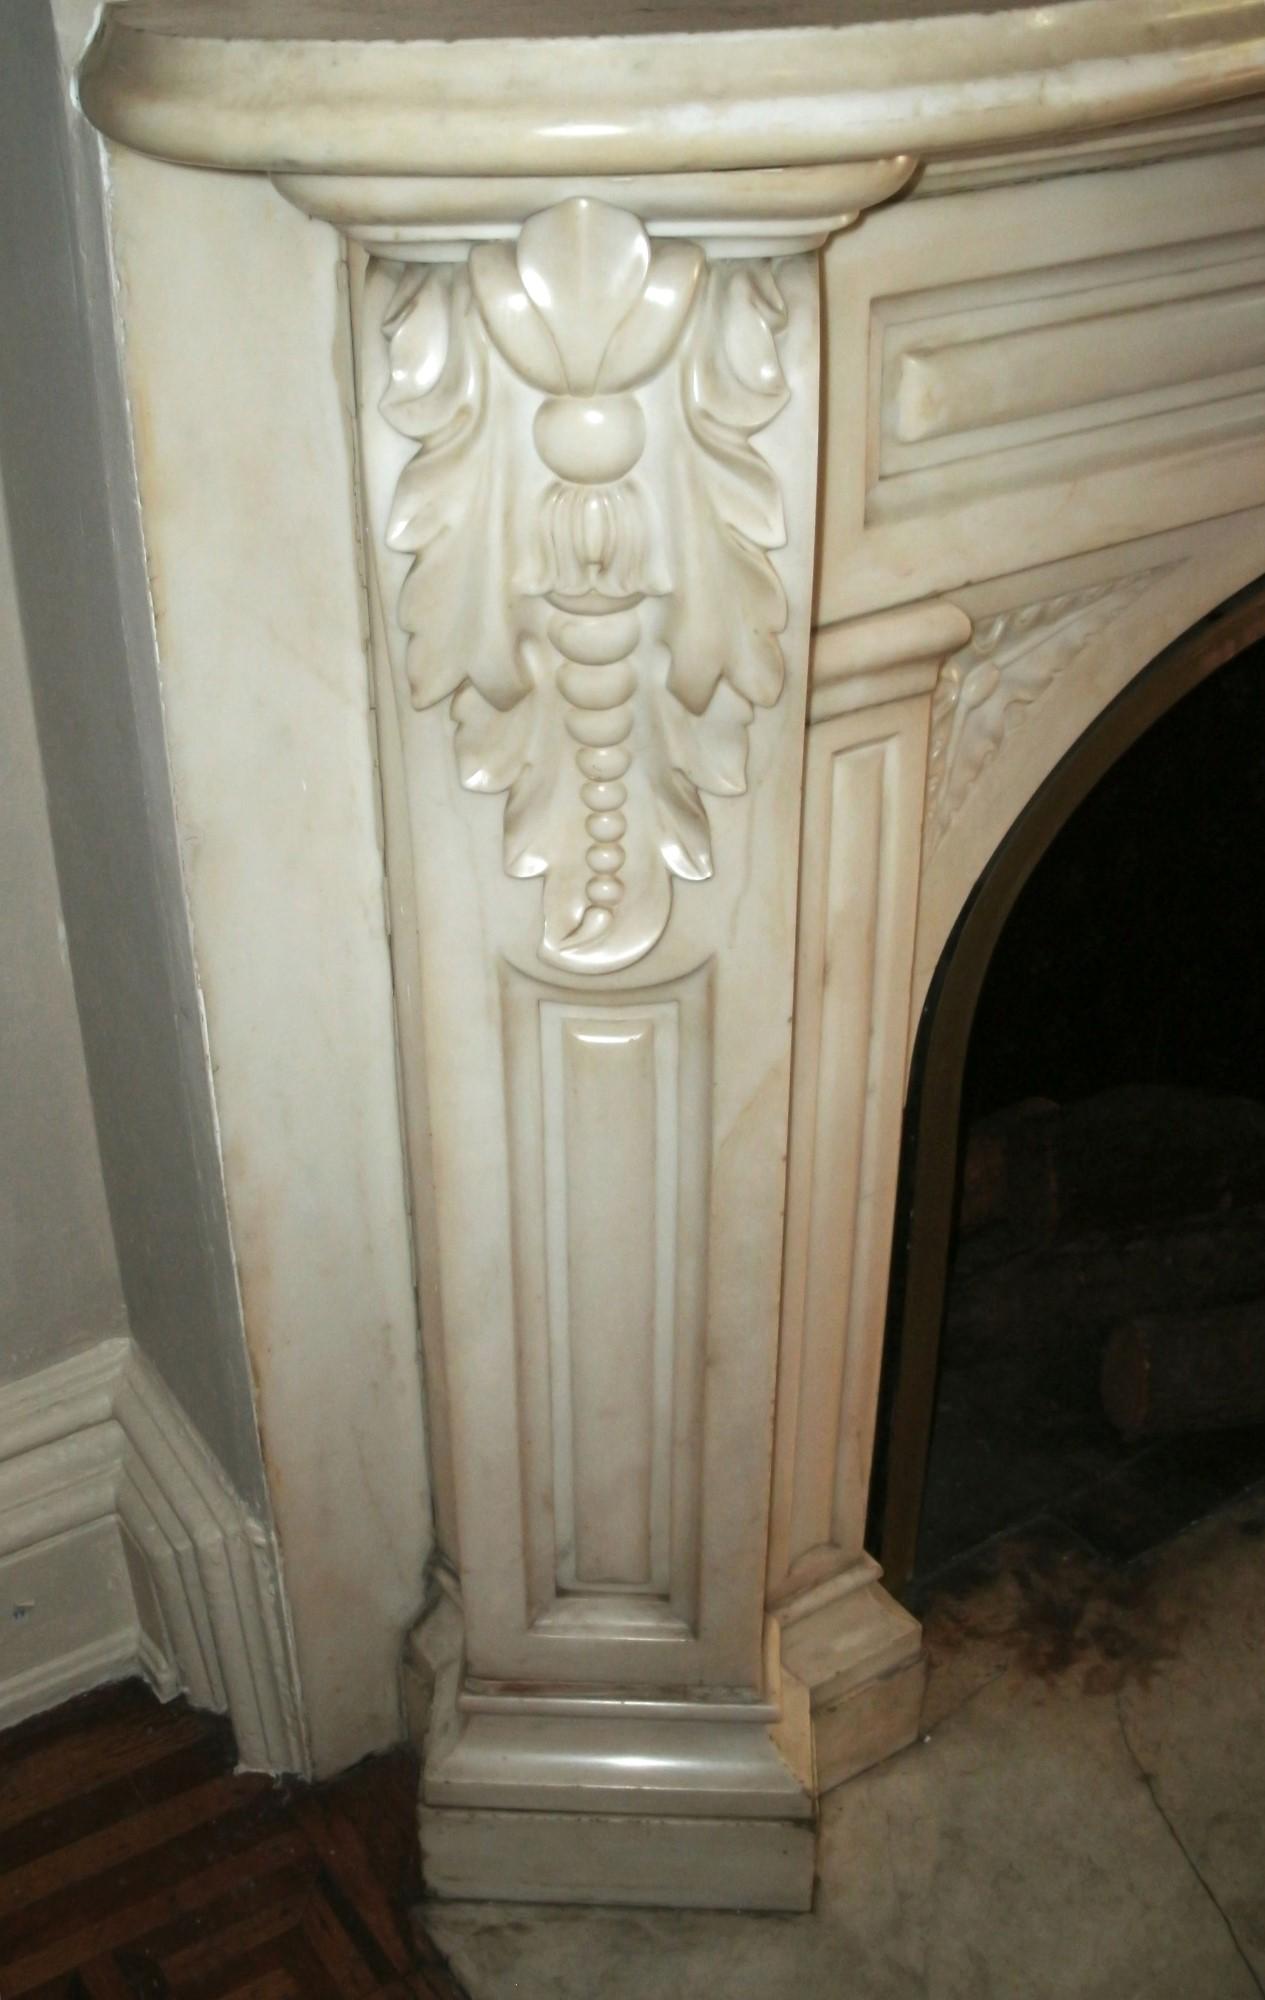 Antique carved statuary marble mantel. Originally the grand mantel of the historic Pen and Brush Club located on East 10th Street, New York City's townhouse estate in 1890. The keystone and corbels are intricately designed and carved. It features